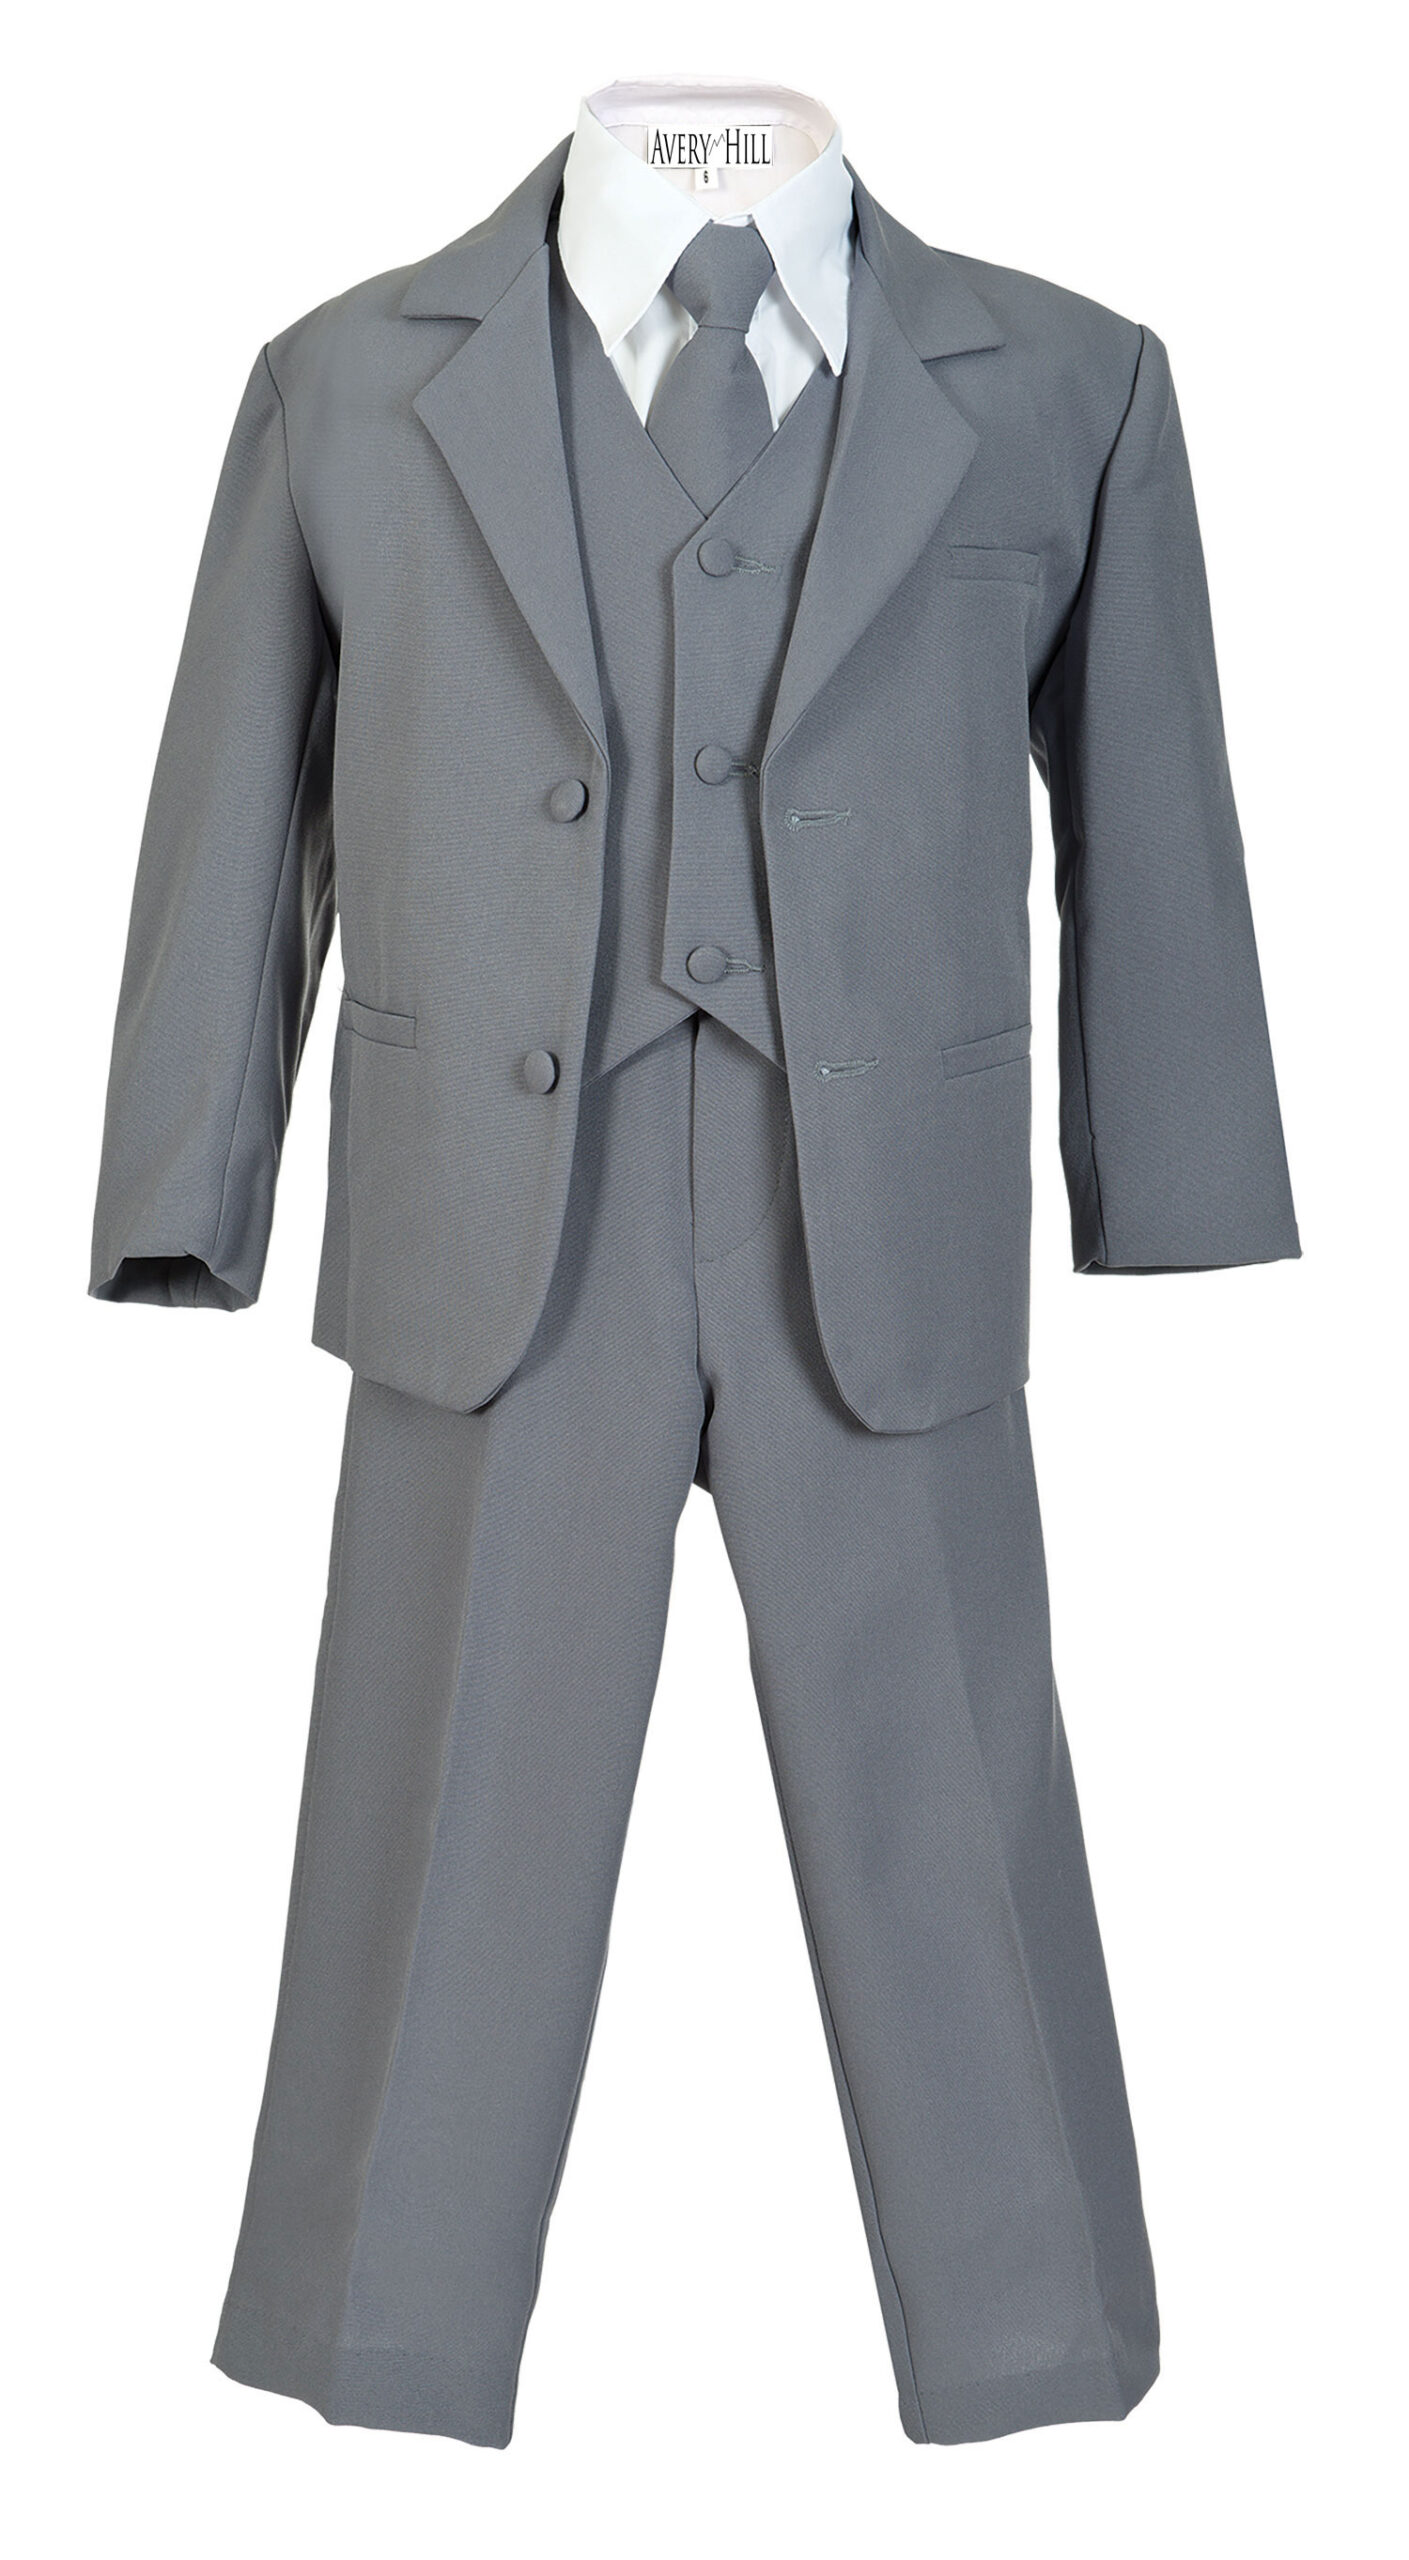 Avery Hill Boys Formal 5 Piece Suit with Shirt and Vest Slate Gray - 12